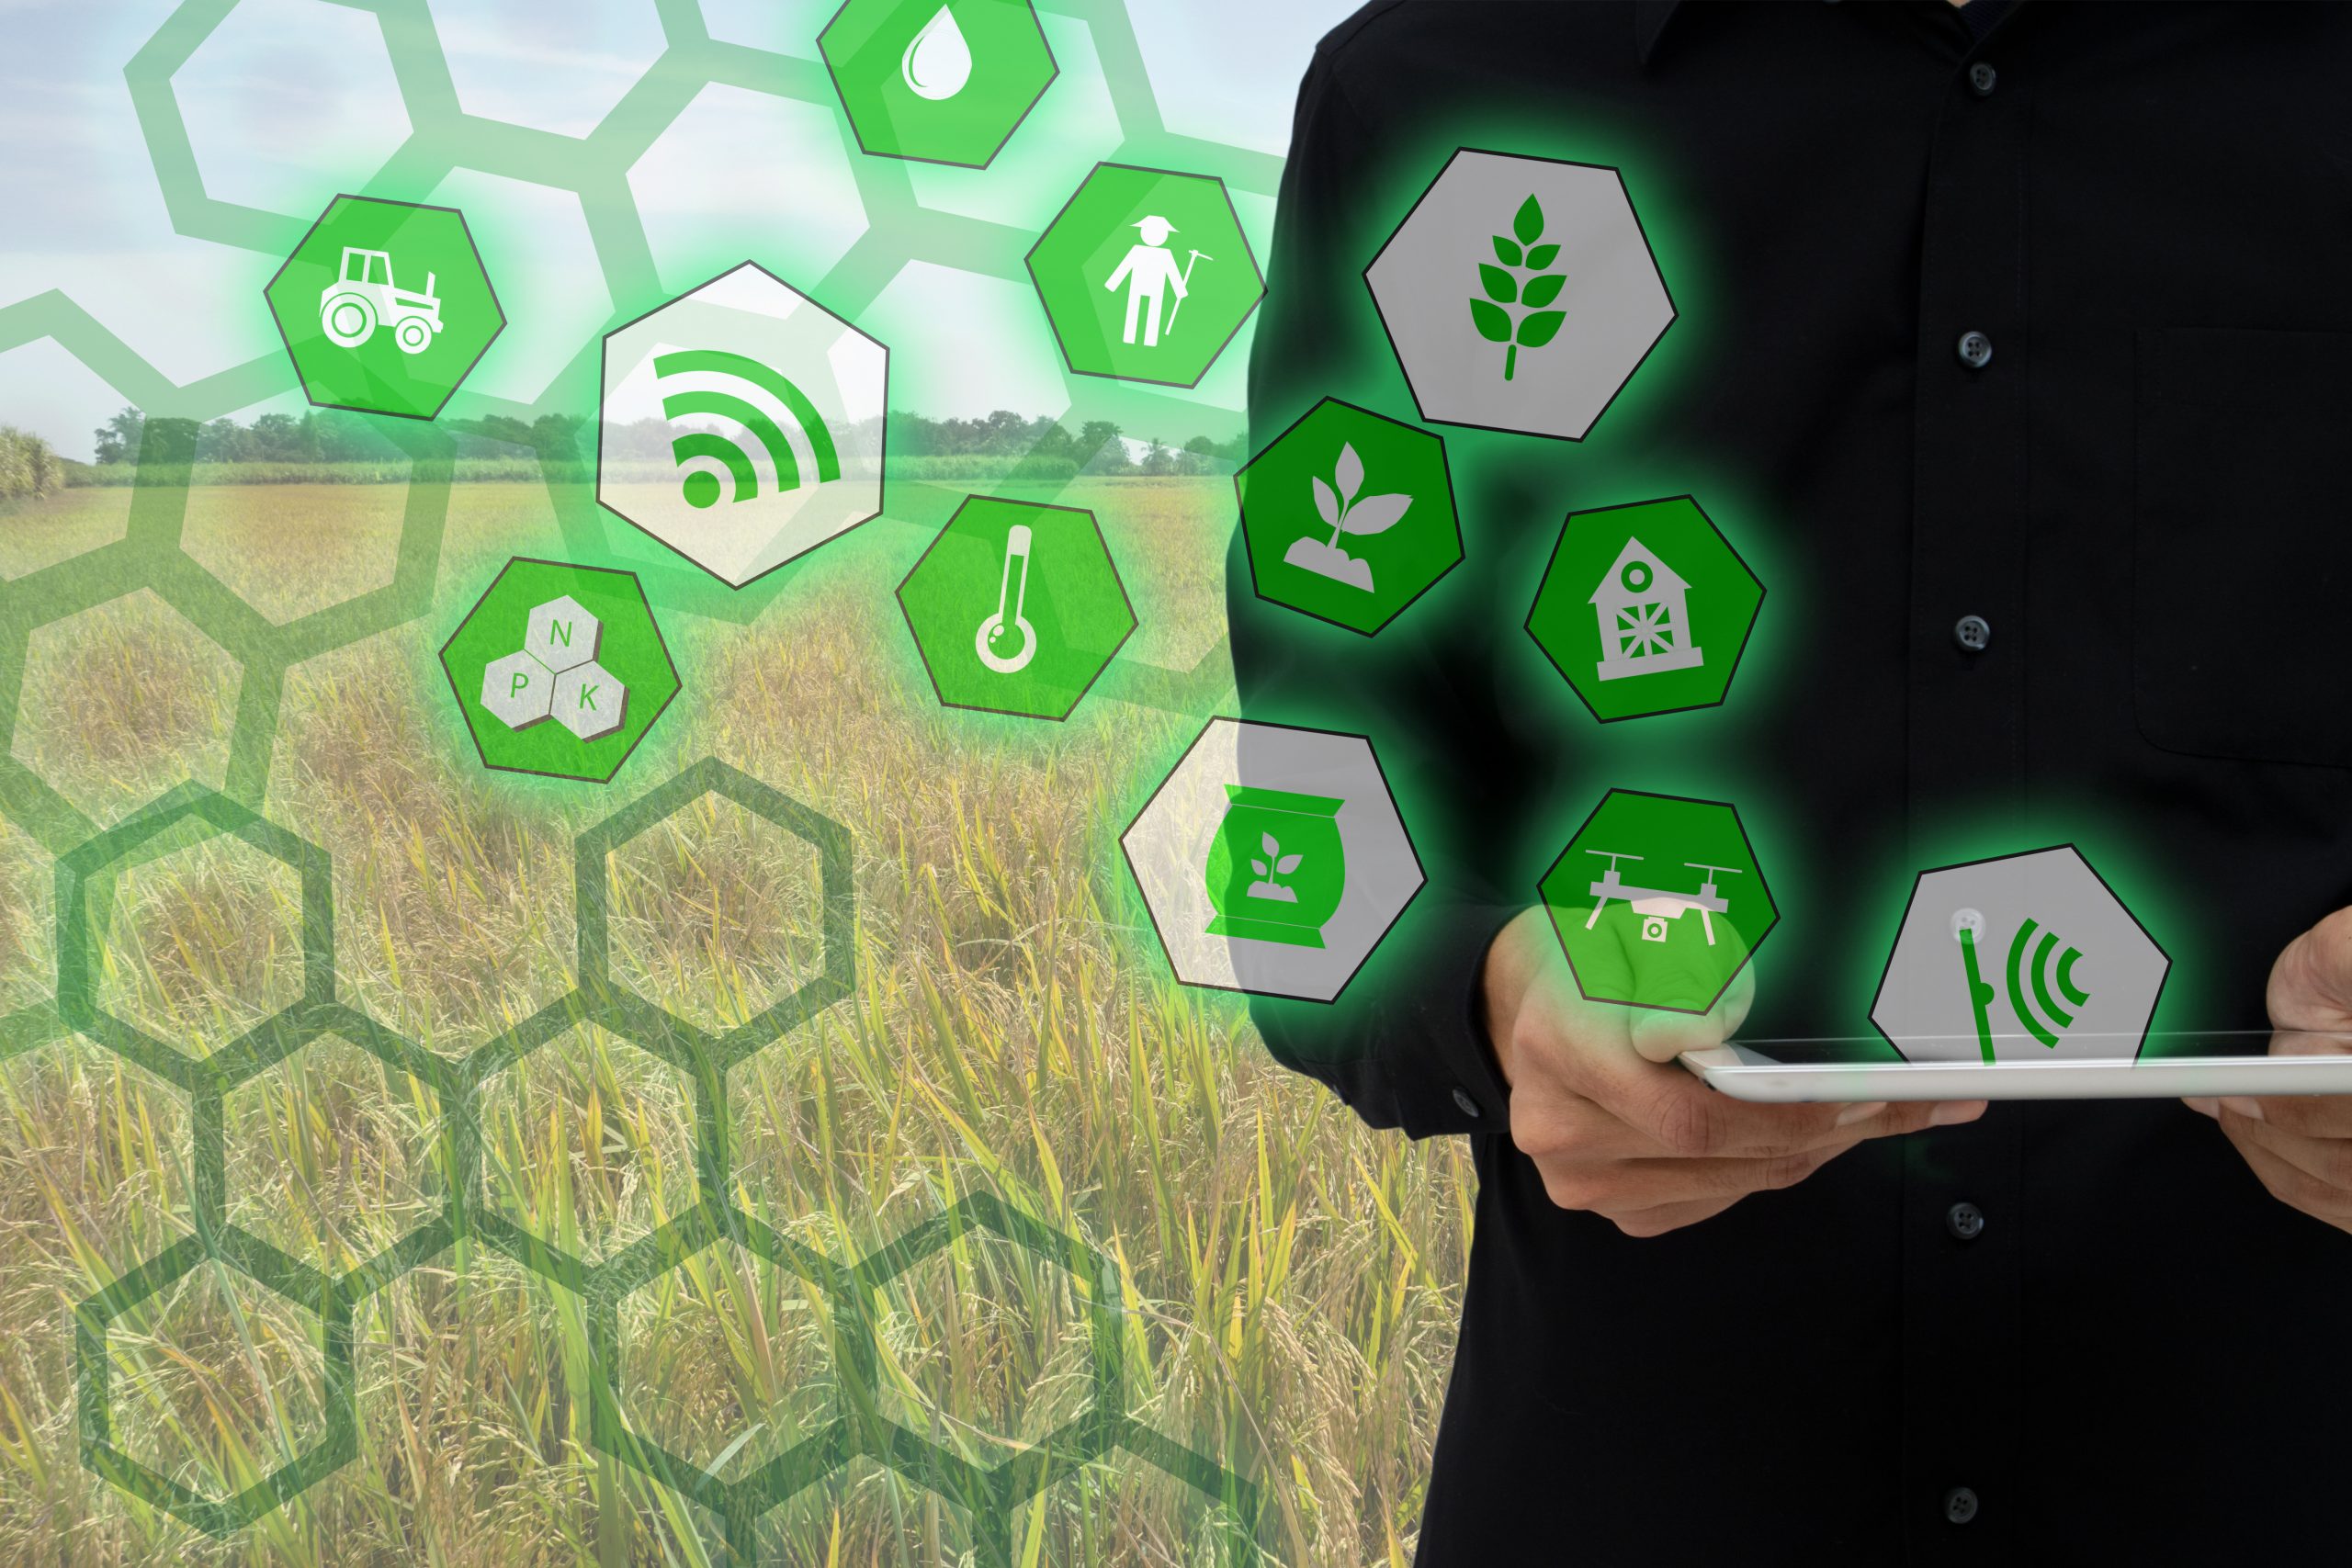 New Code of Conduct on agricultural data. Photo: Shutterstock